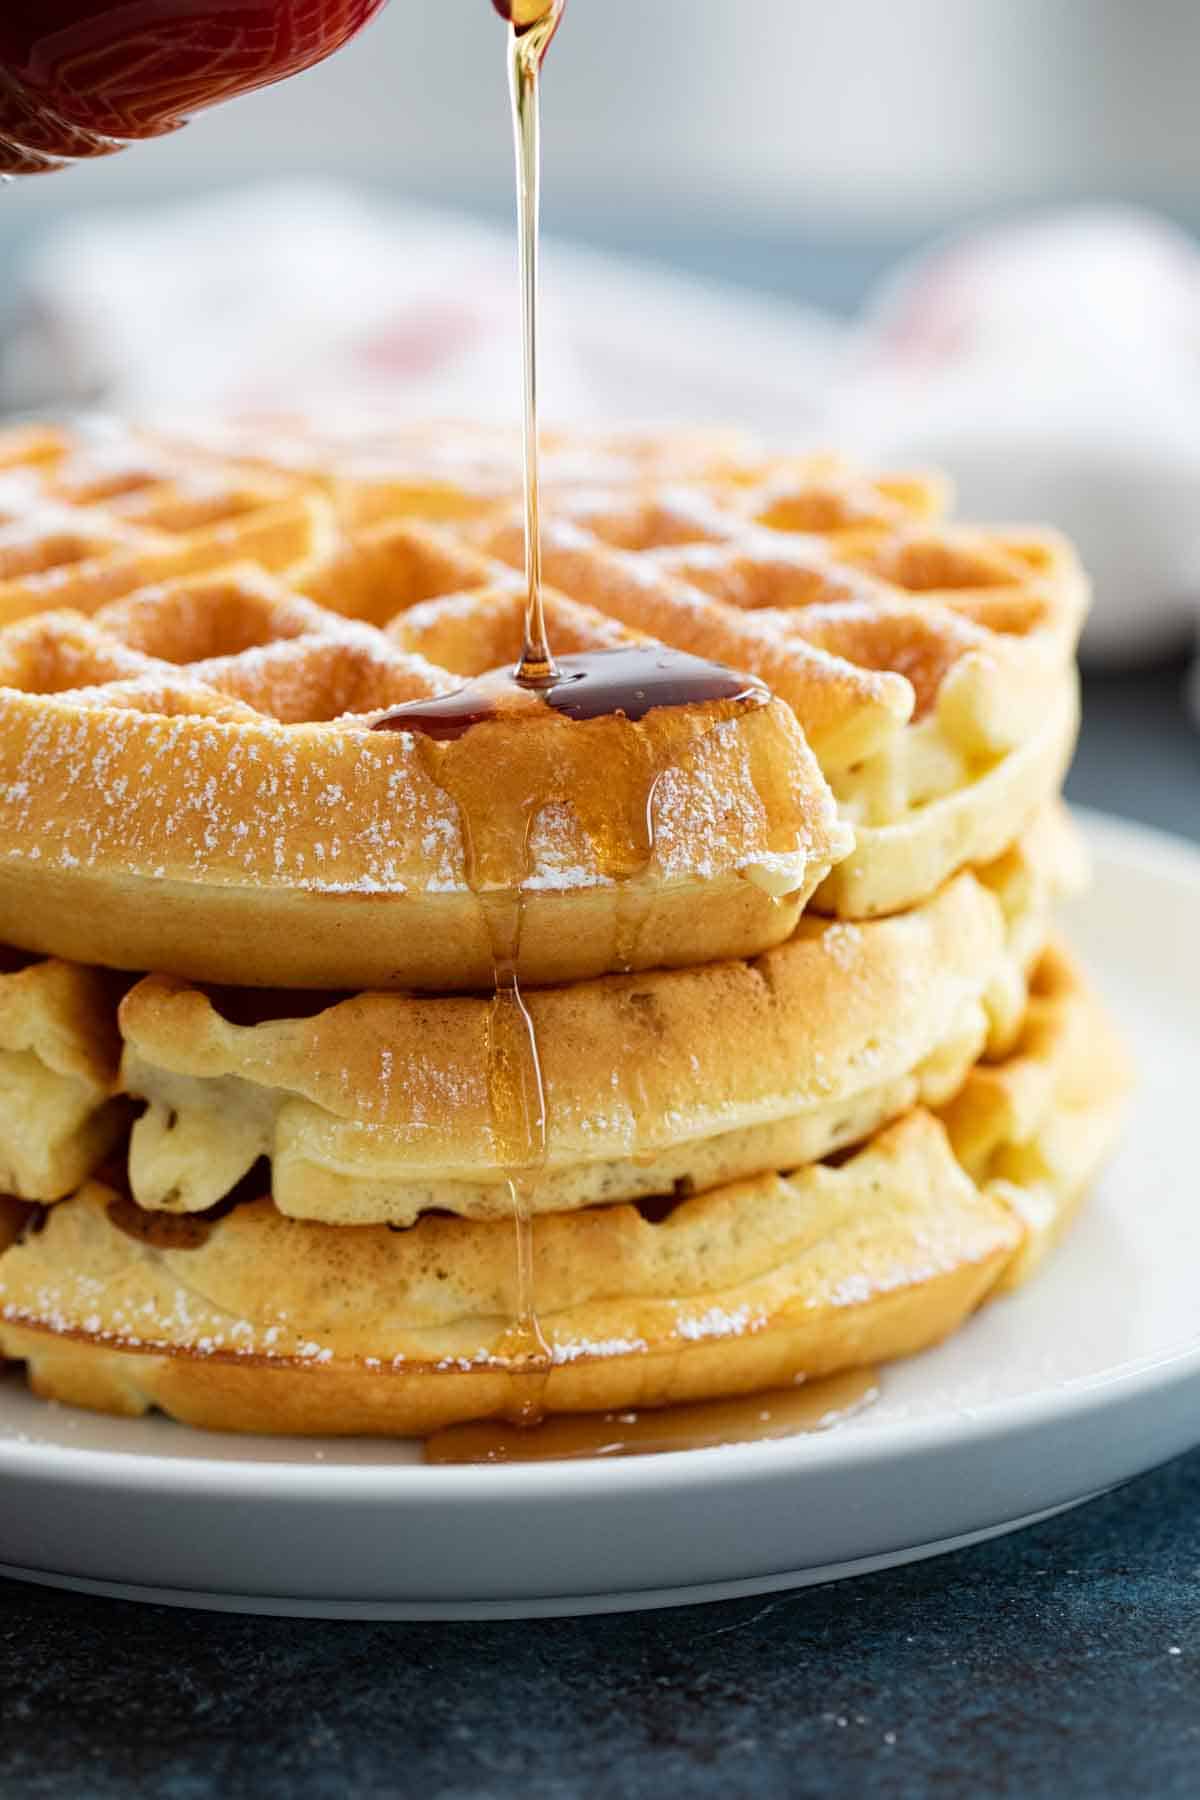 From Scratch Waffle Recipe - Taste and Tell